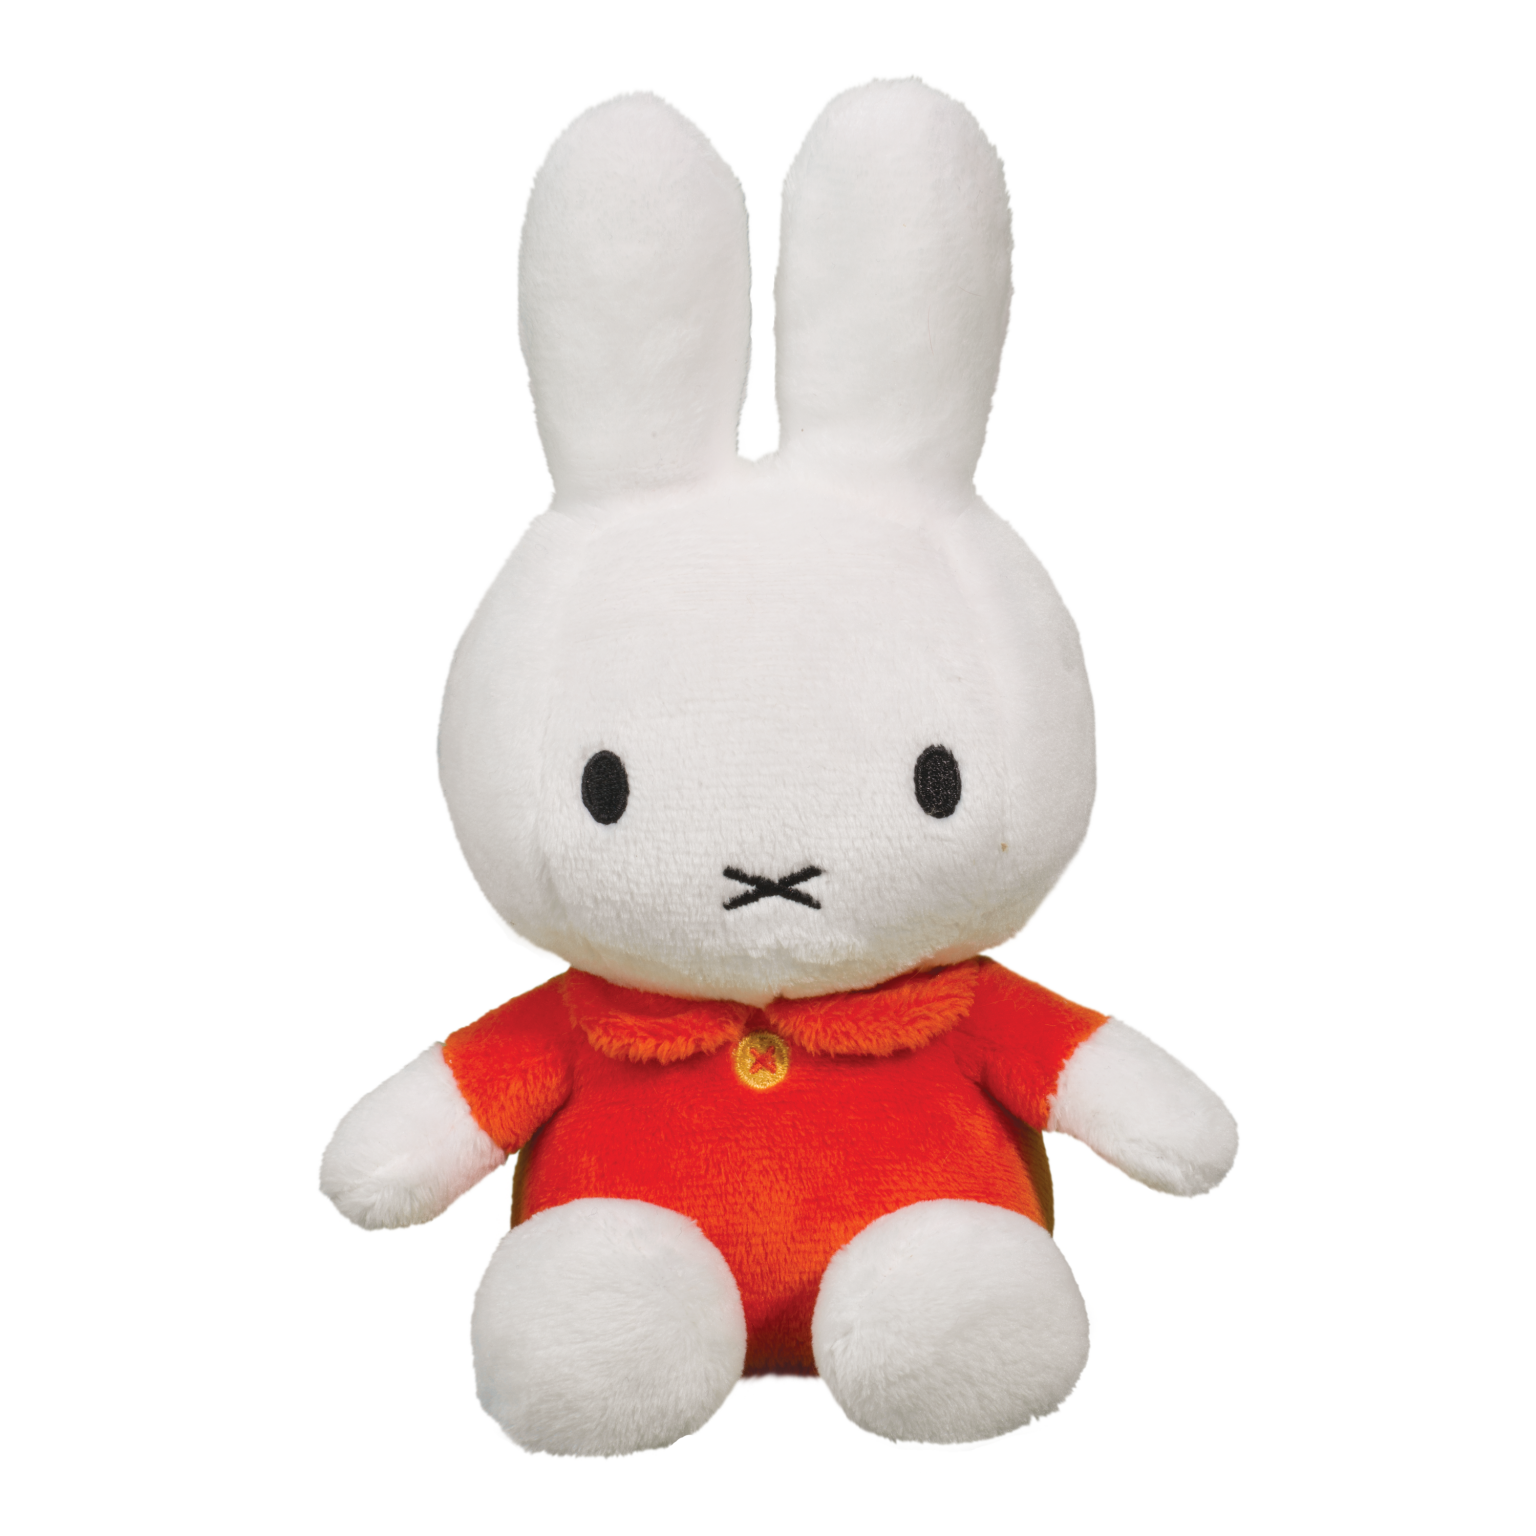 Miffy Plush 7.5in, Classic Red